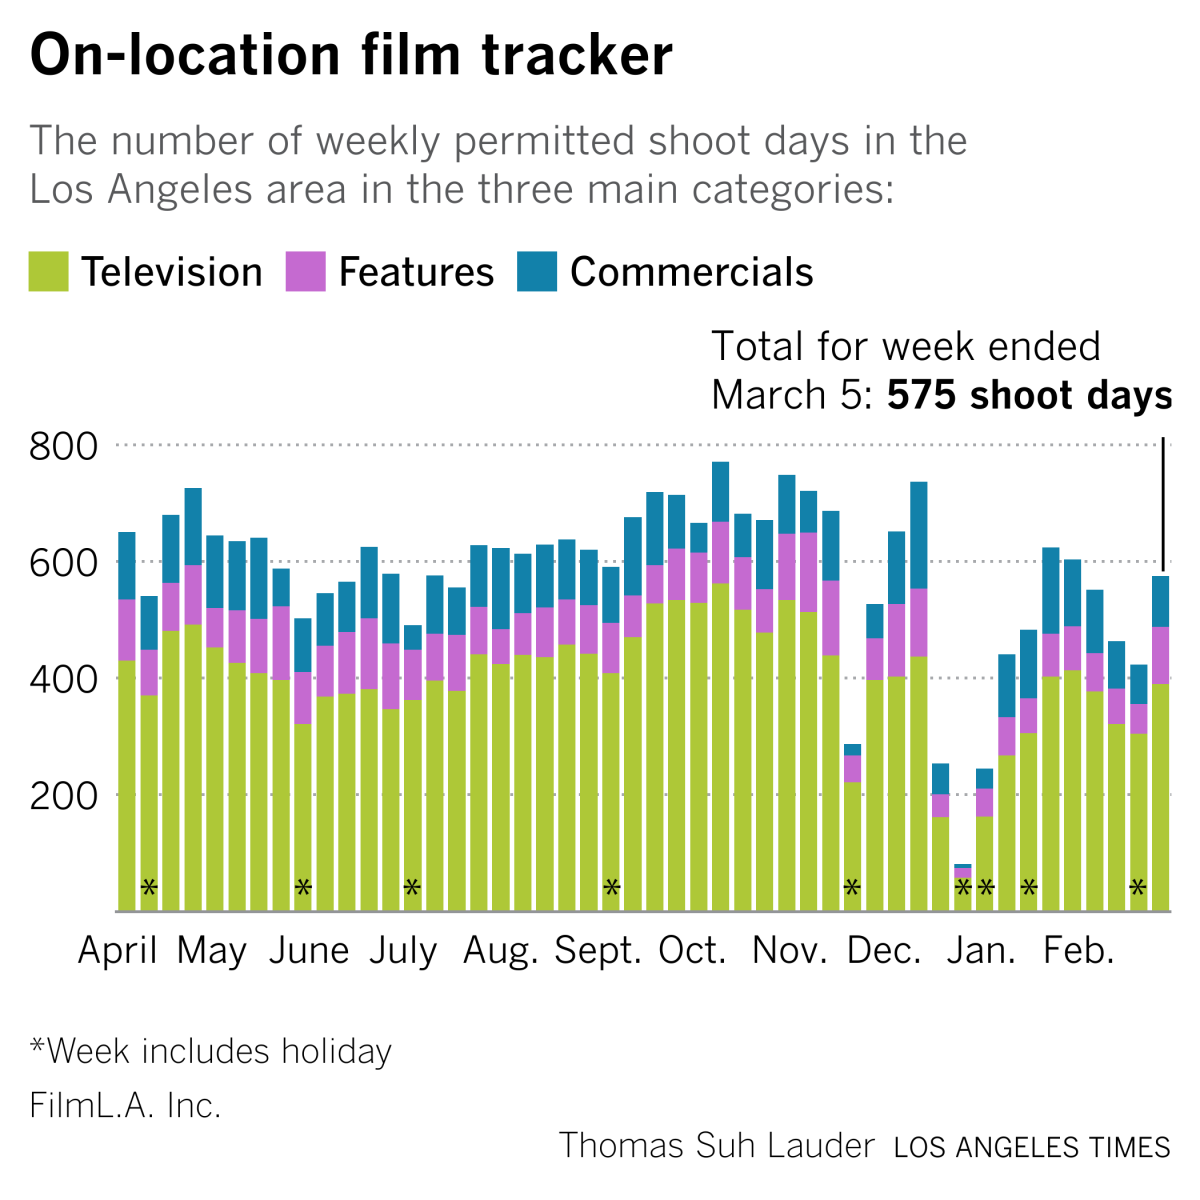 A chart shows weekly permitted location shoot days in the Los Angeles area.